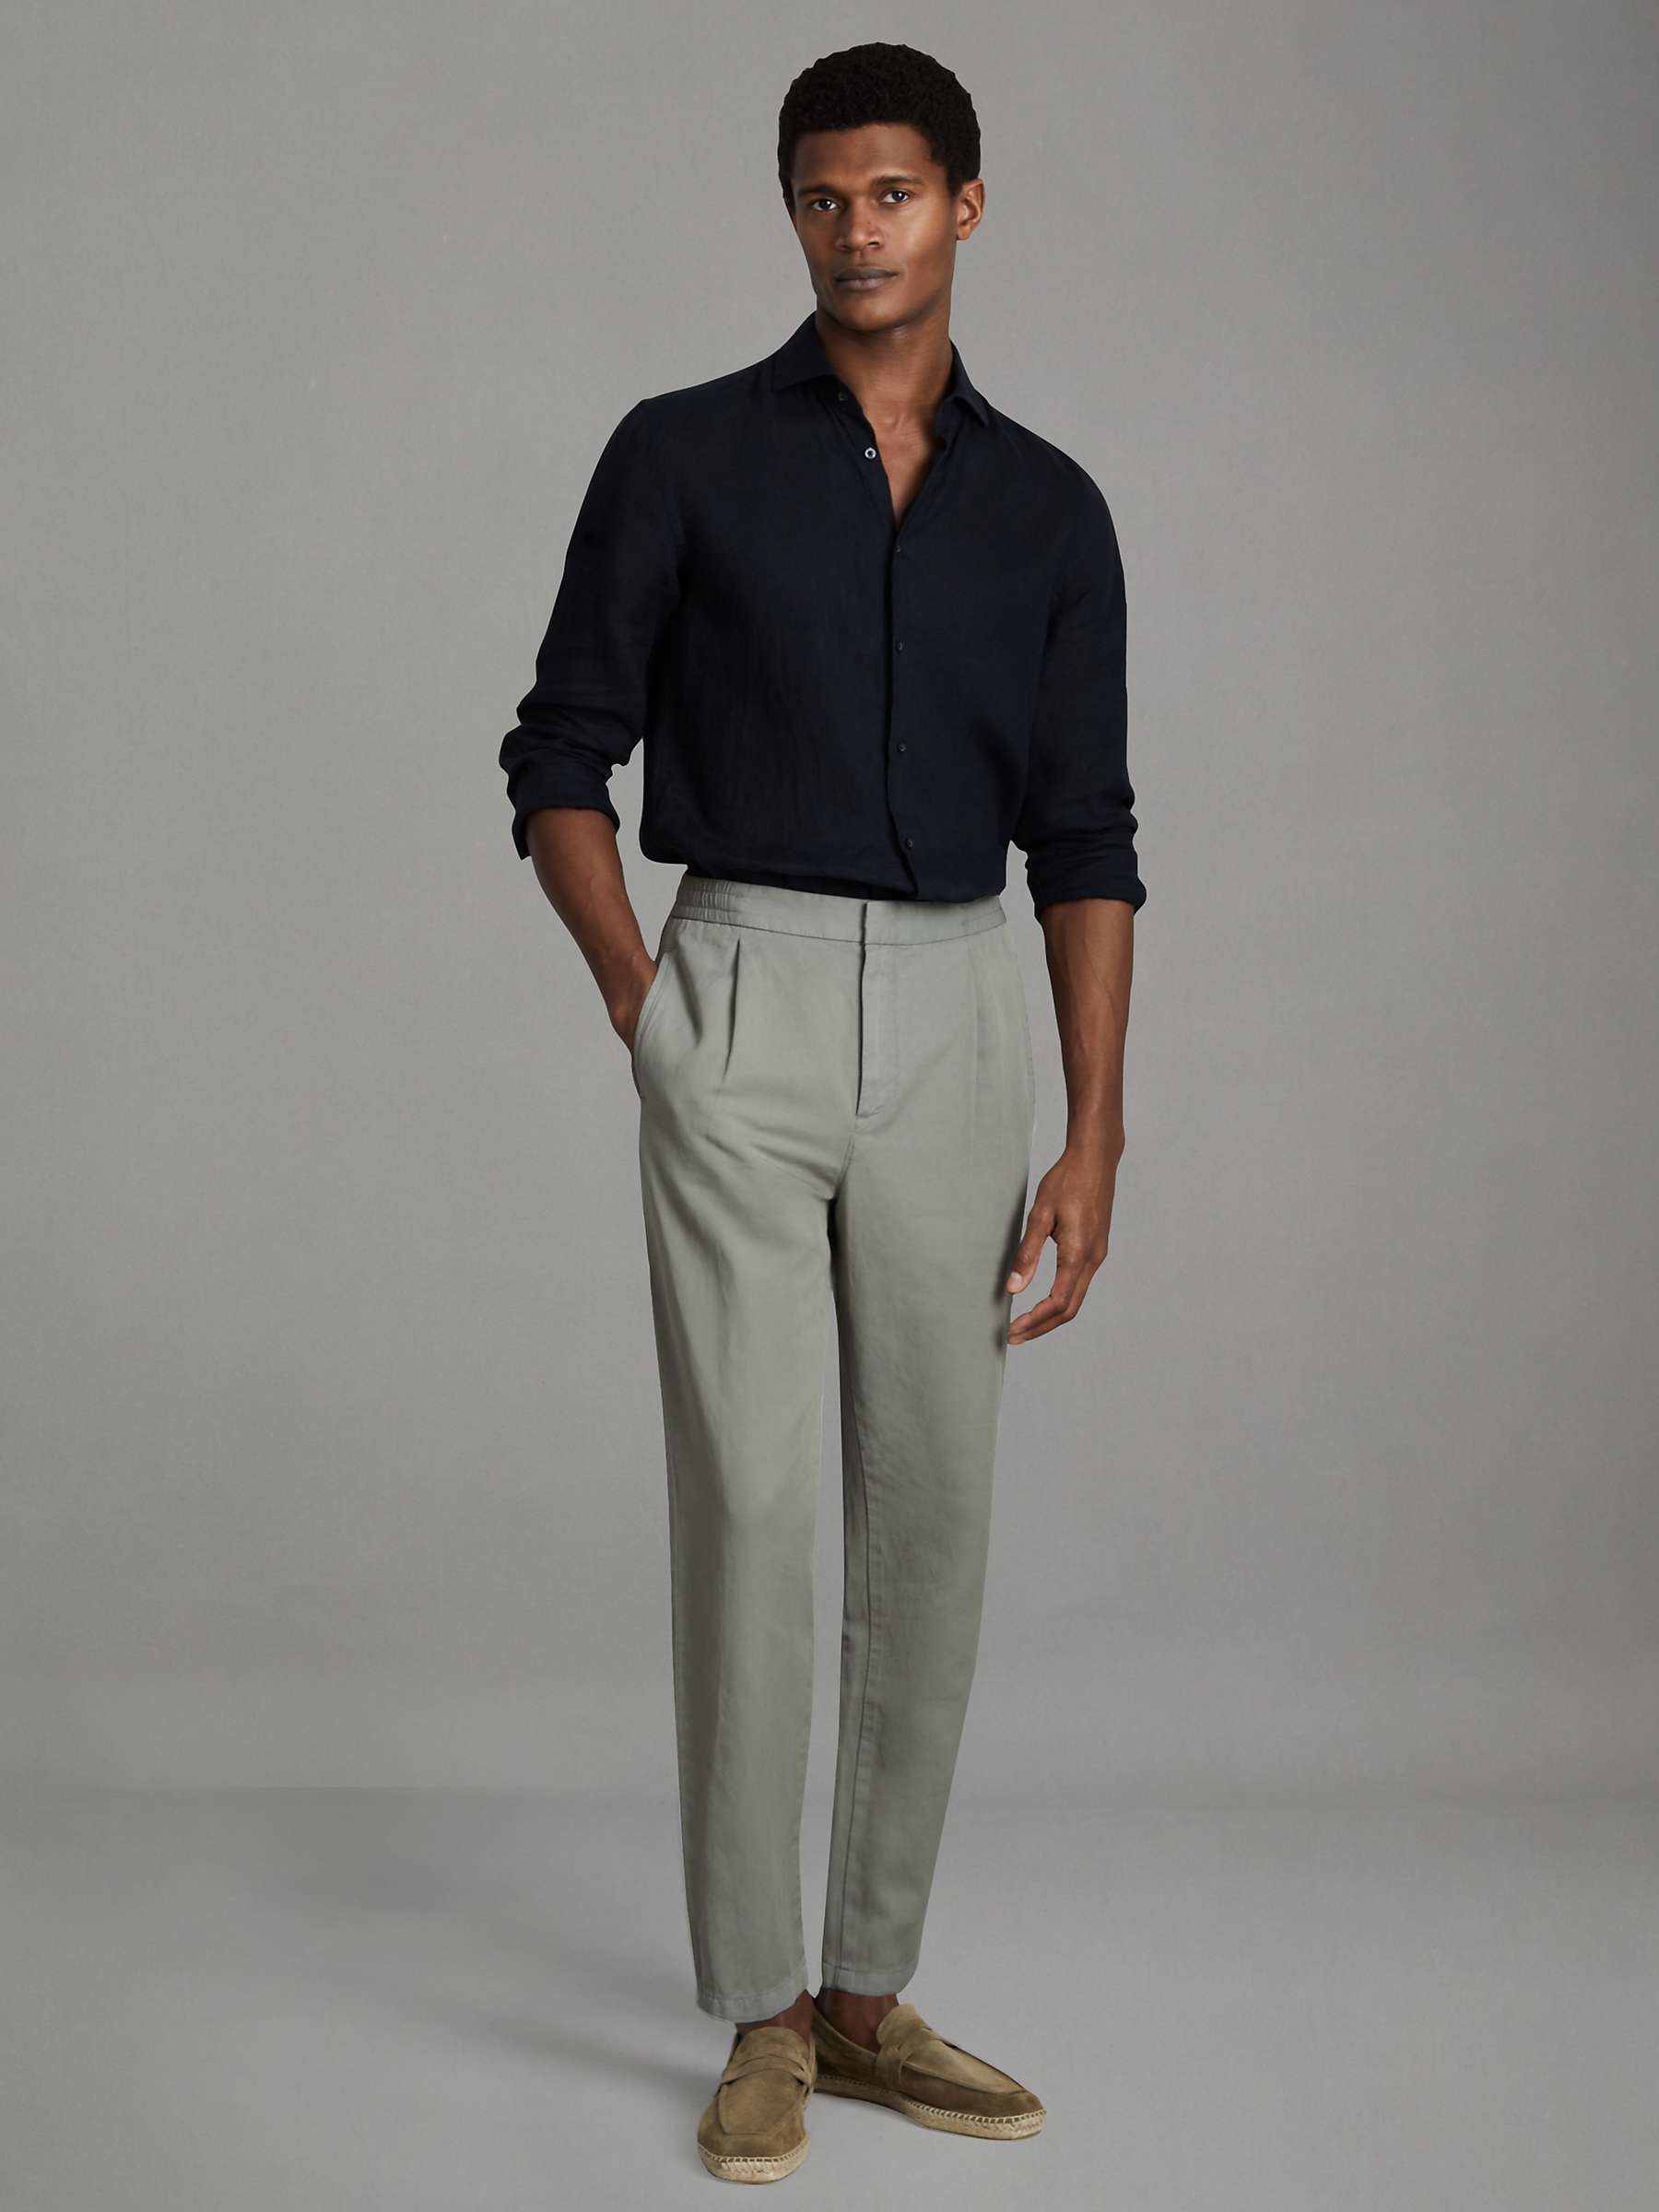 Buy Reiss Pact Linen Blend Trousers Online at johnlewis.com